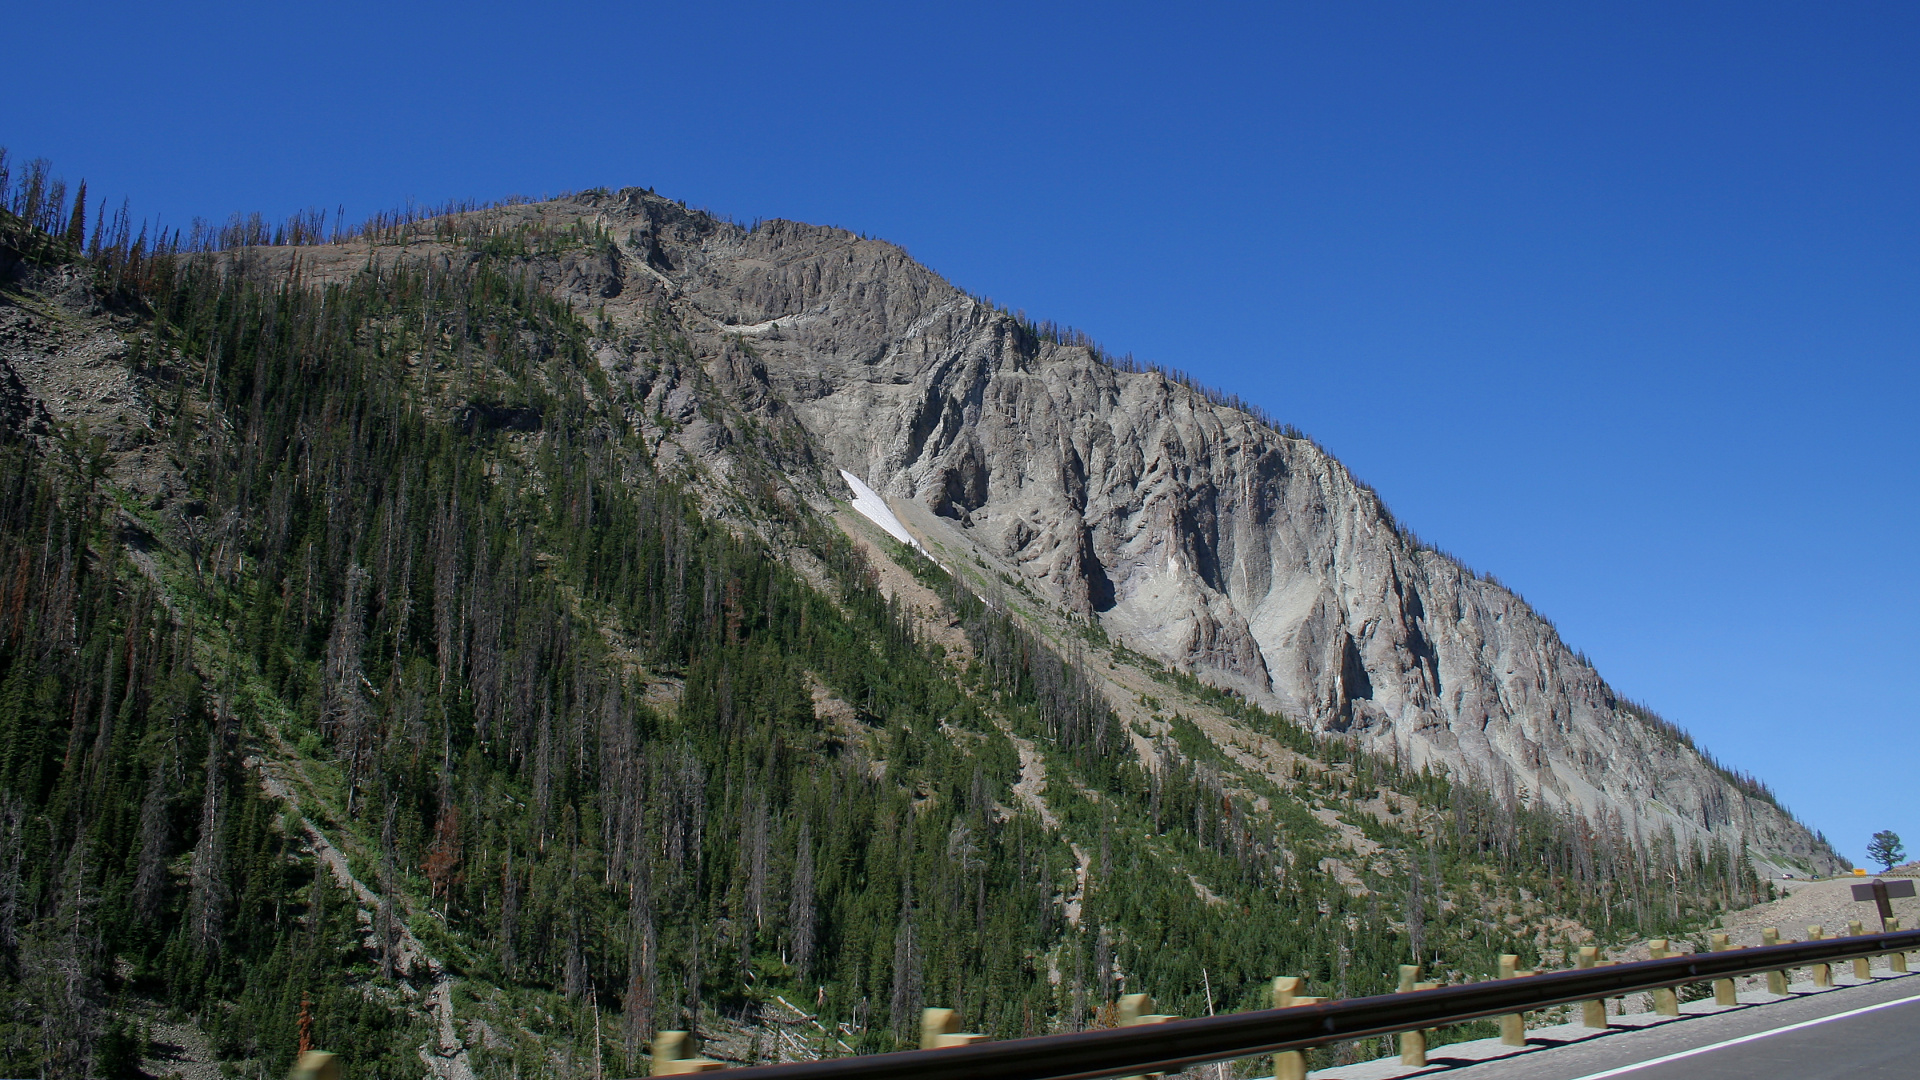 Sylvan Pass (Travels » US Trip 1: Cheyenne Country » The Journey » Yellowstone National Park)